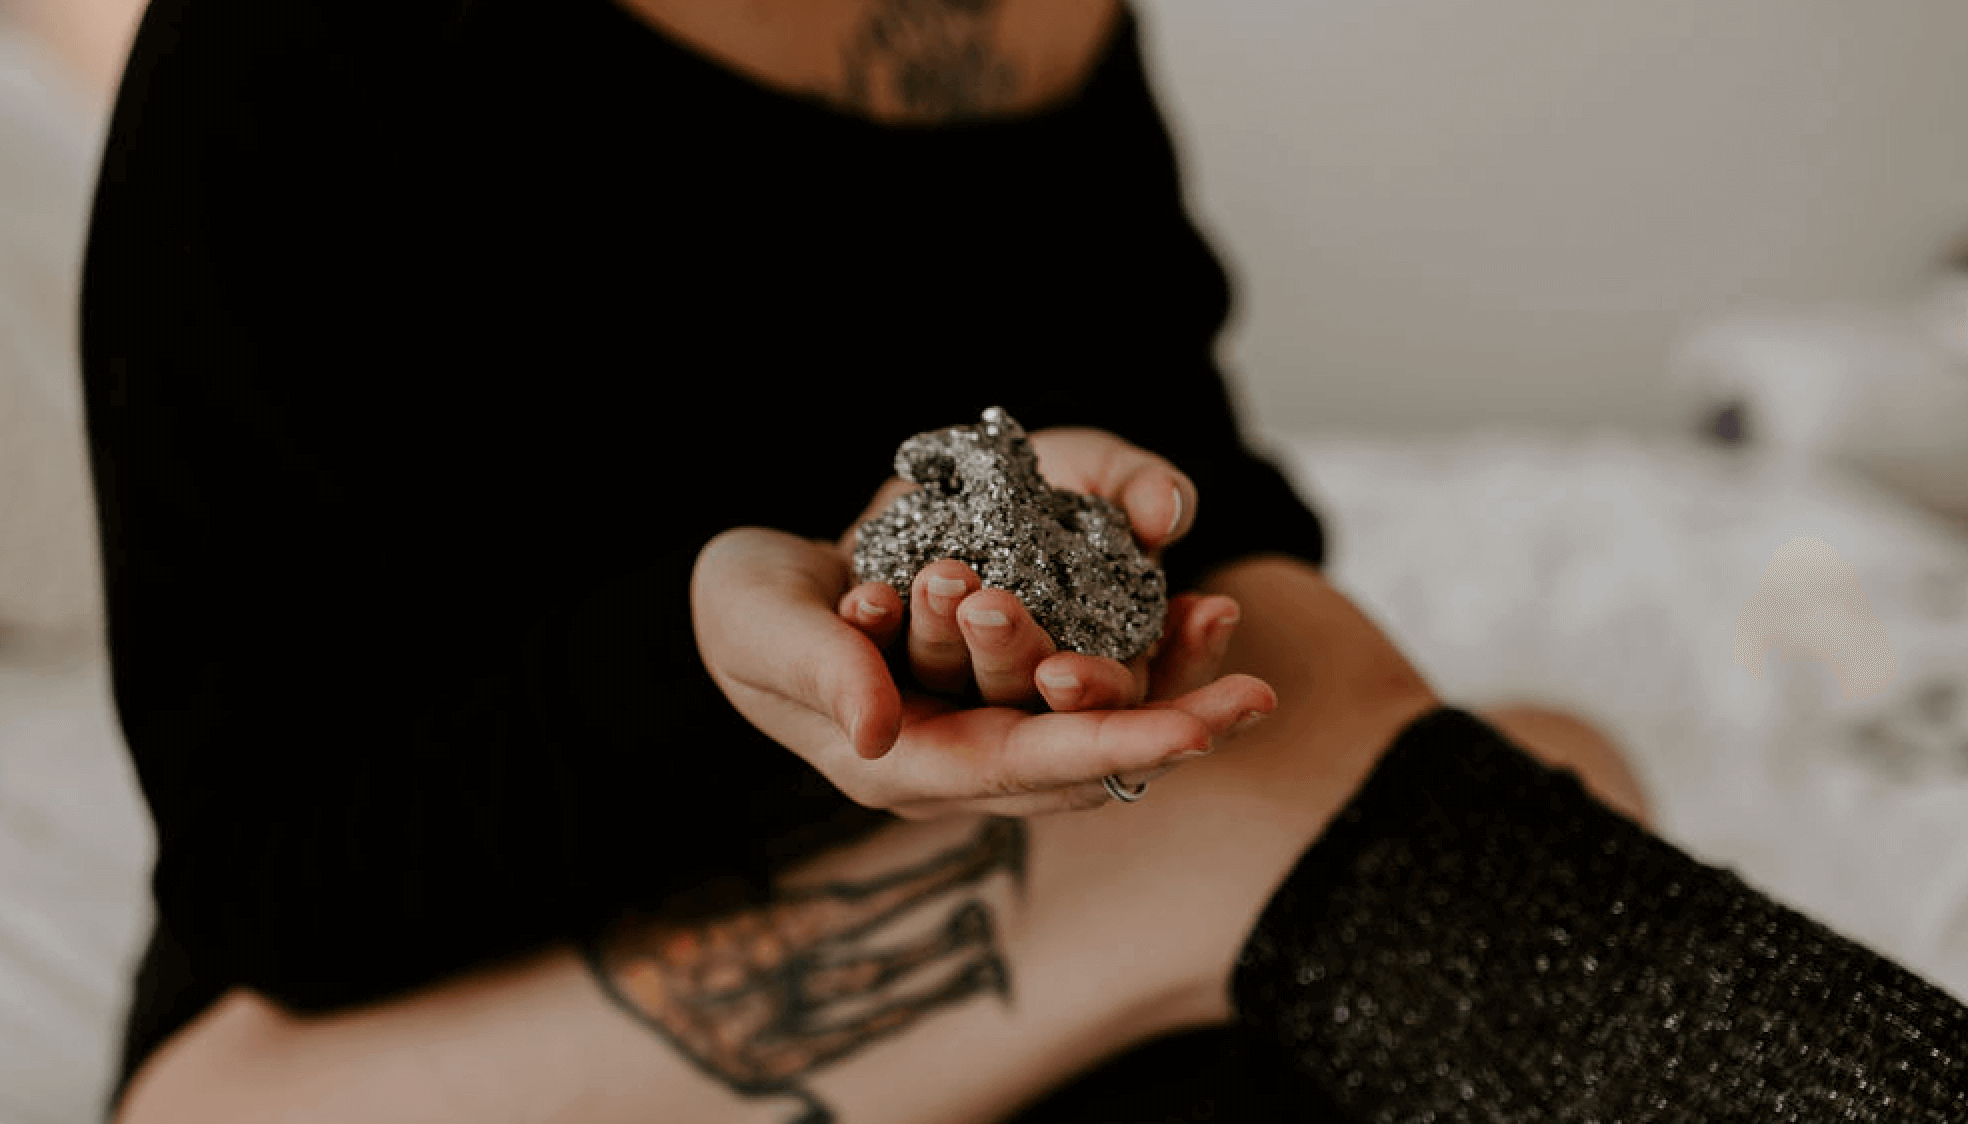 Woman wearing black sitting with a pyrite crystal in her hand